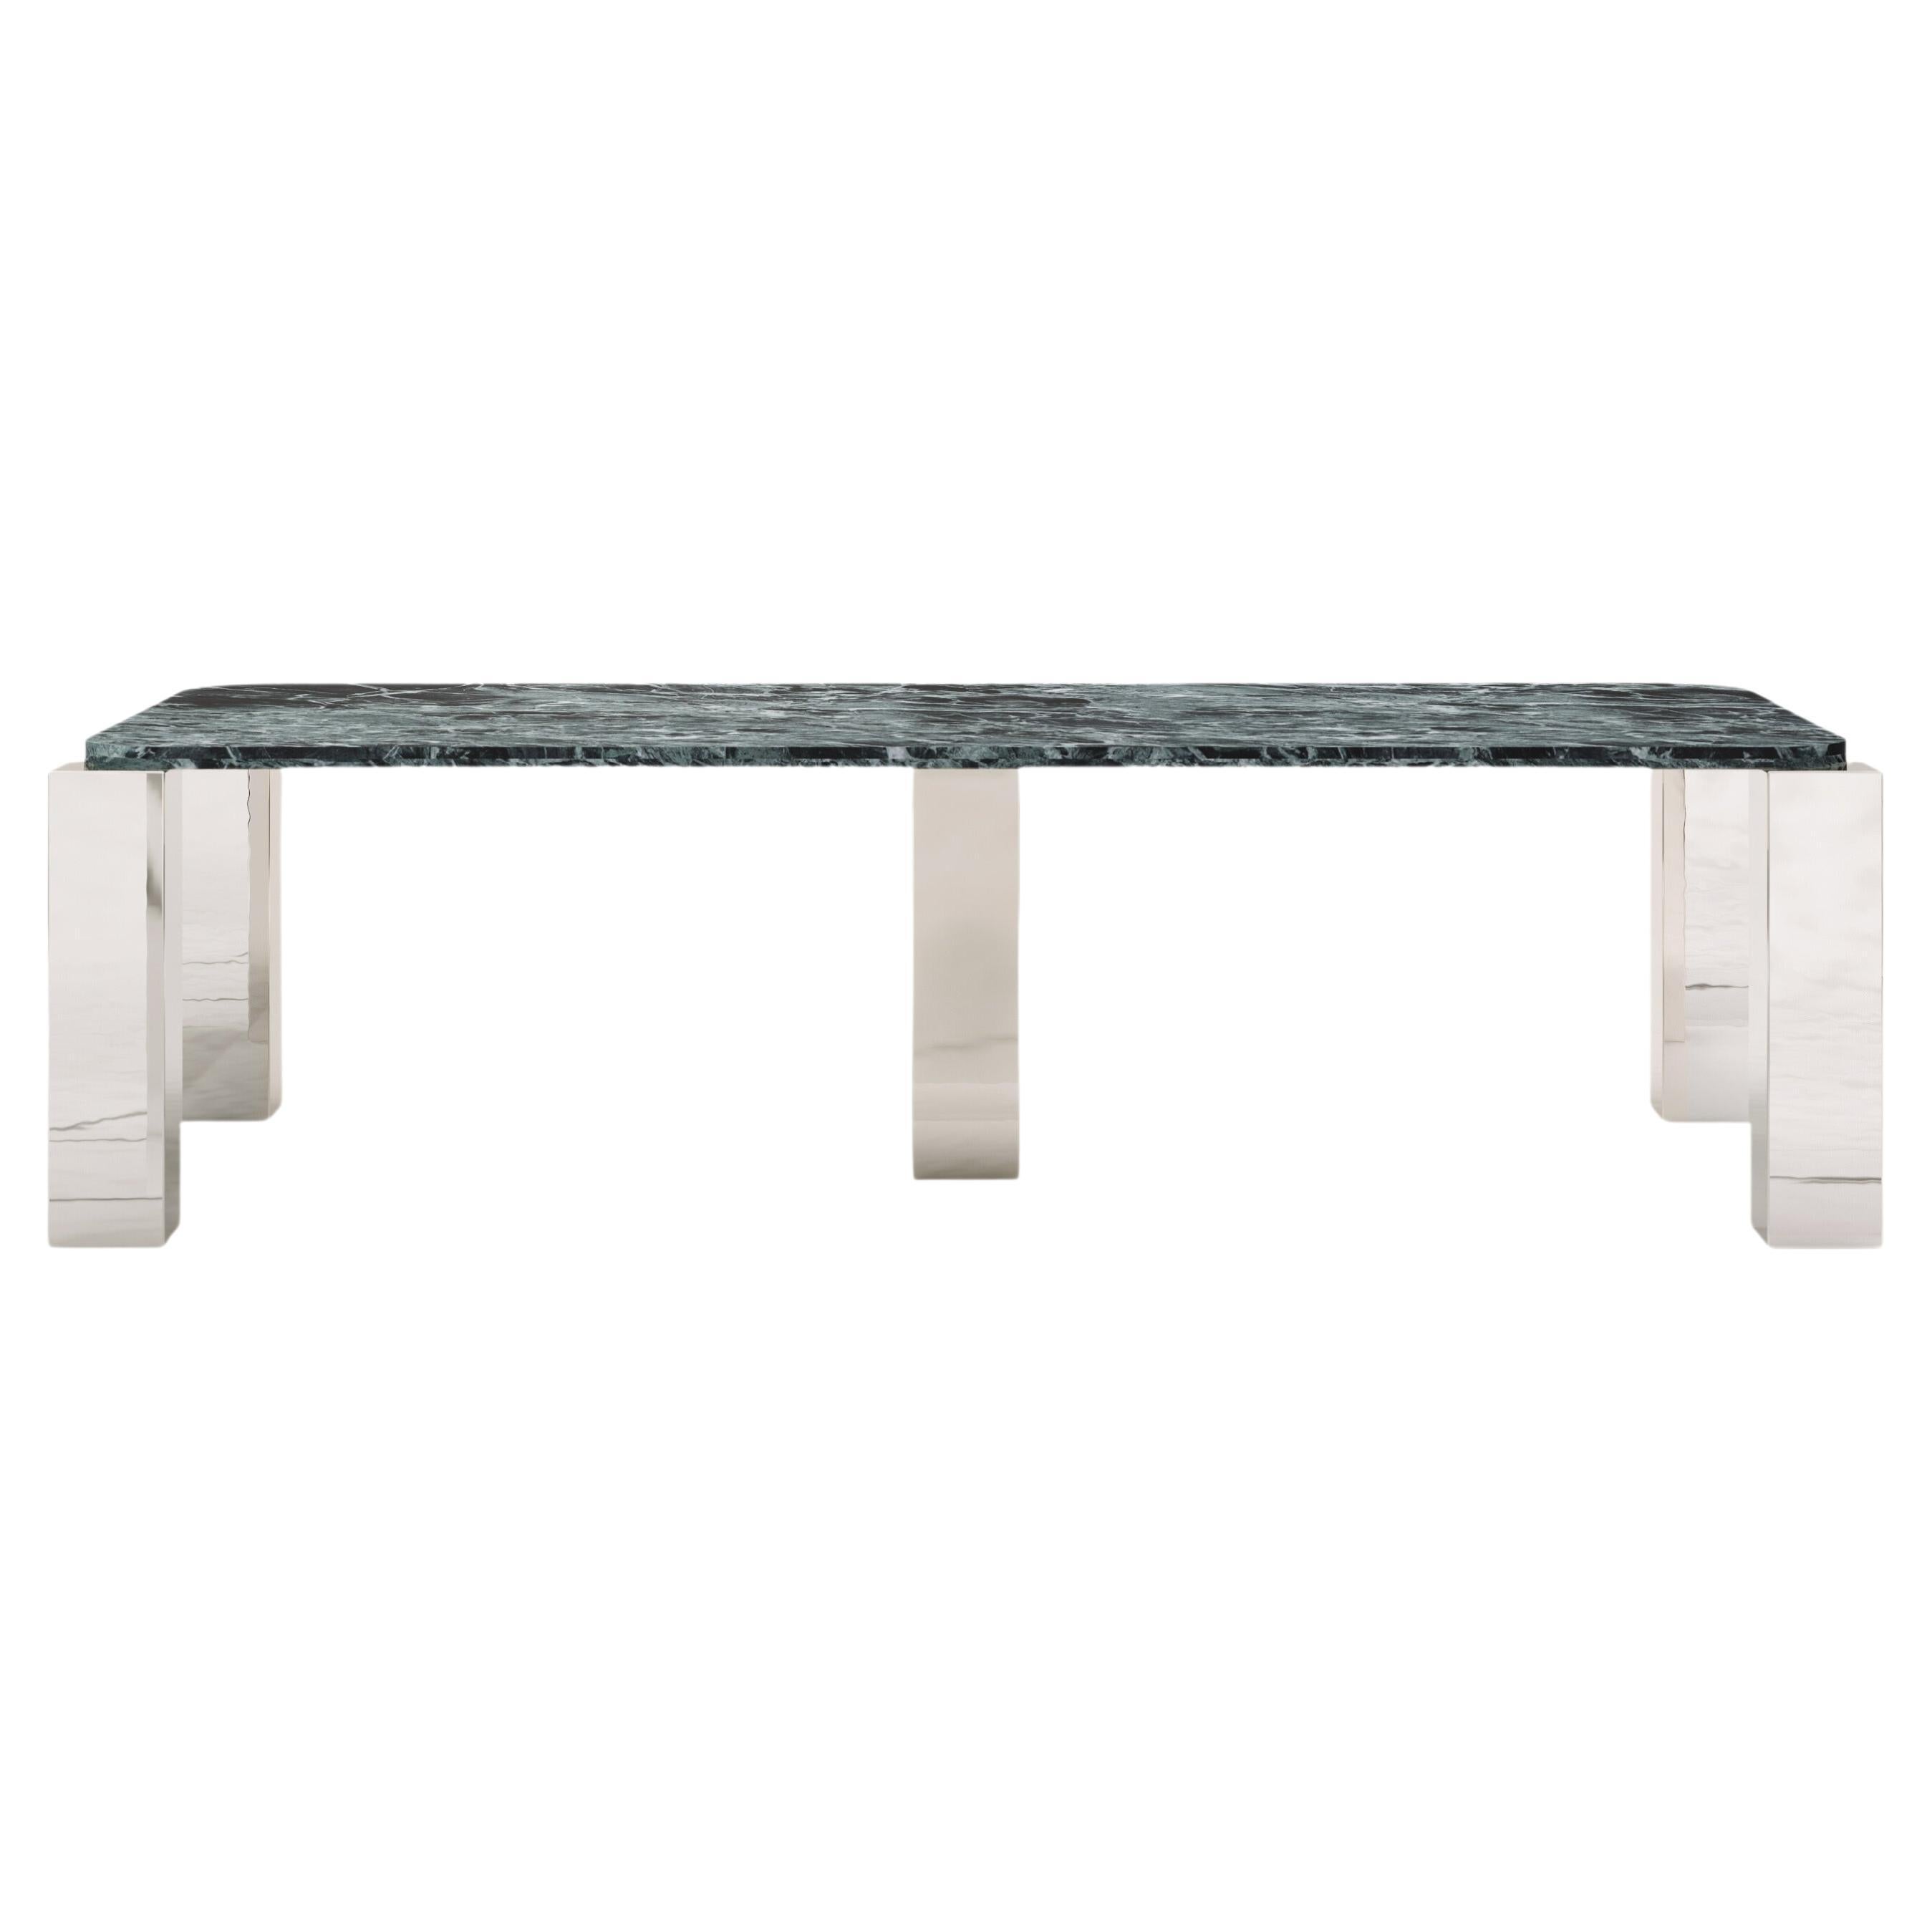 FORM(LA) Cubo Rectangle Dining Table 86”L x 44”W x 30”H Verde Marble & Chrome For Sale